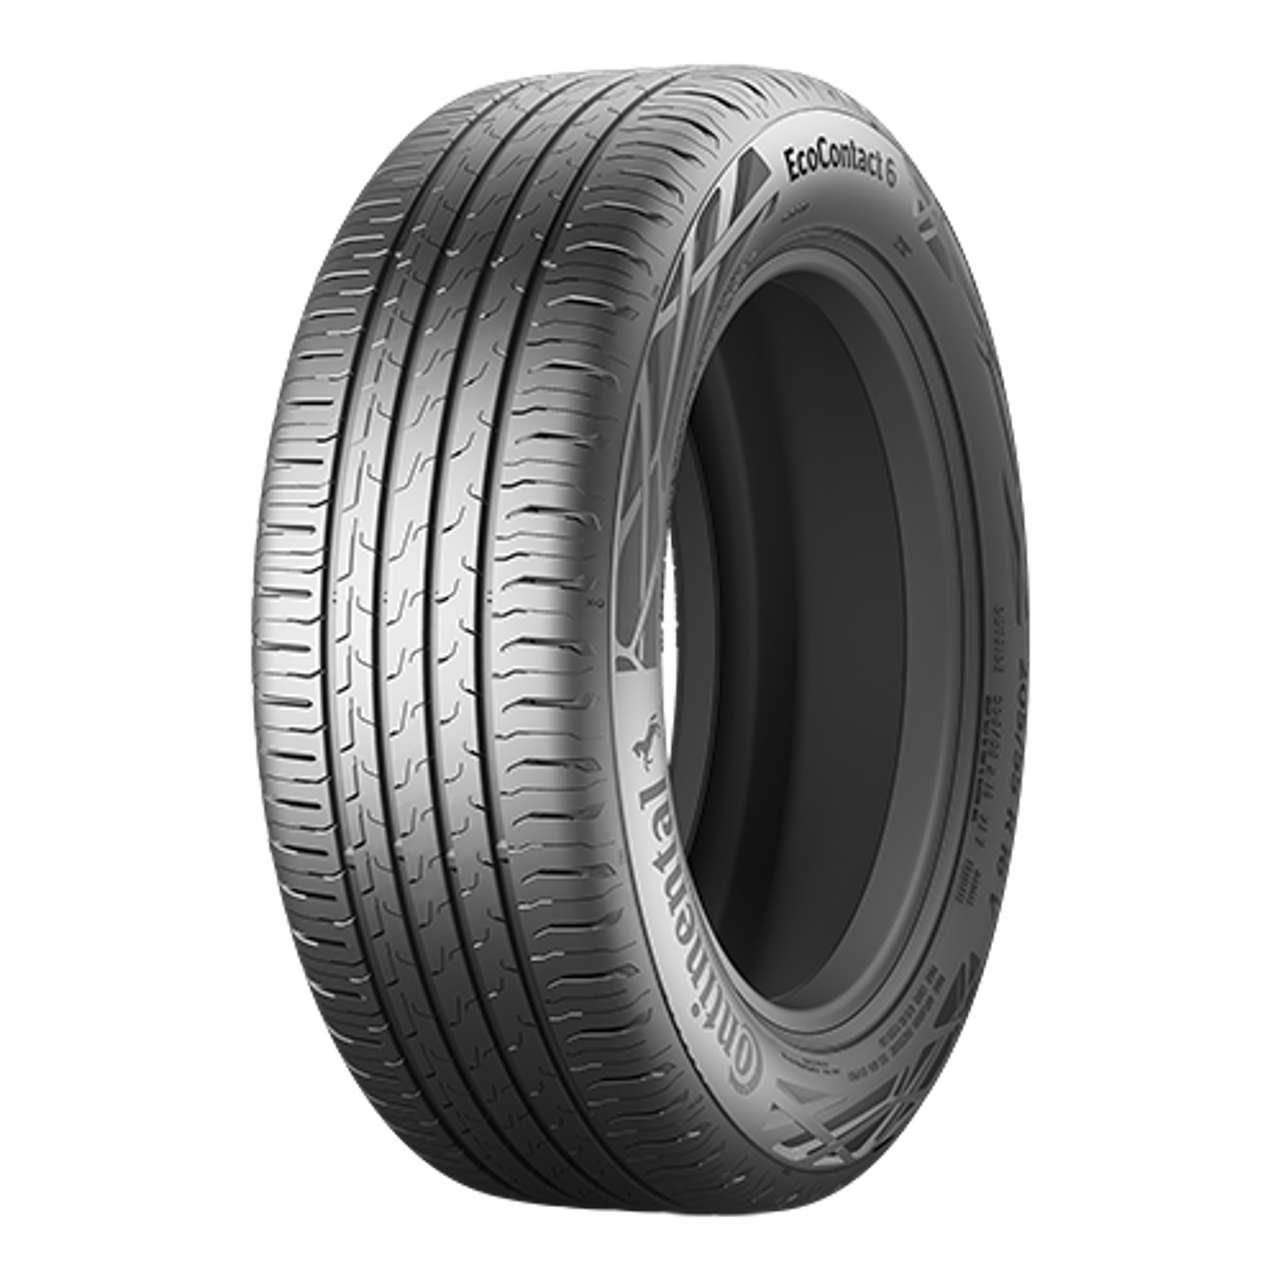 CONTINENTAL ECOCONTACT 6 (J) (EVc) 225/45R18 95Y